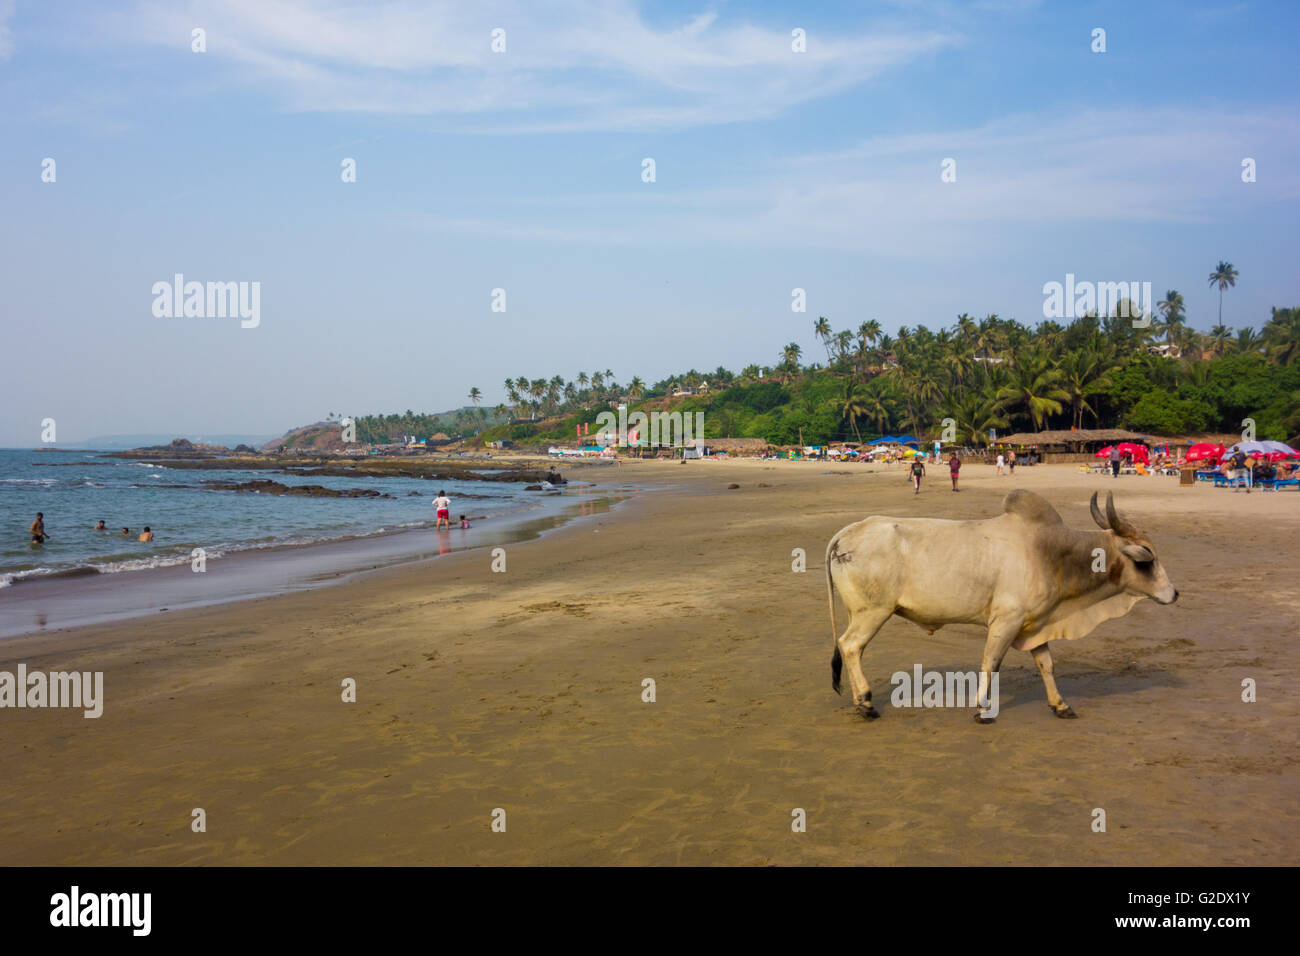 A cow wandering on Little Vagator beach in Goa, India Stock Photo